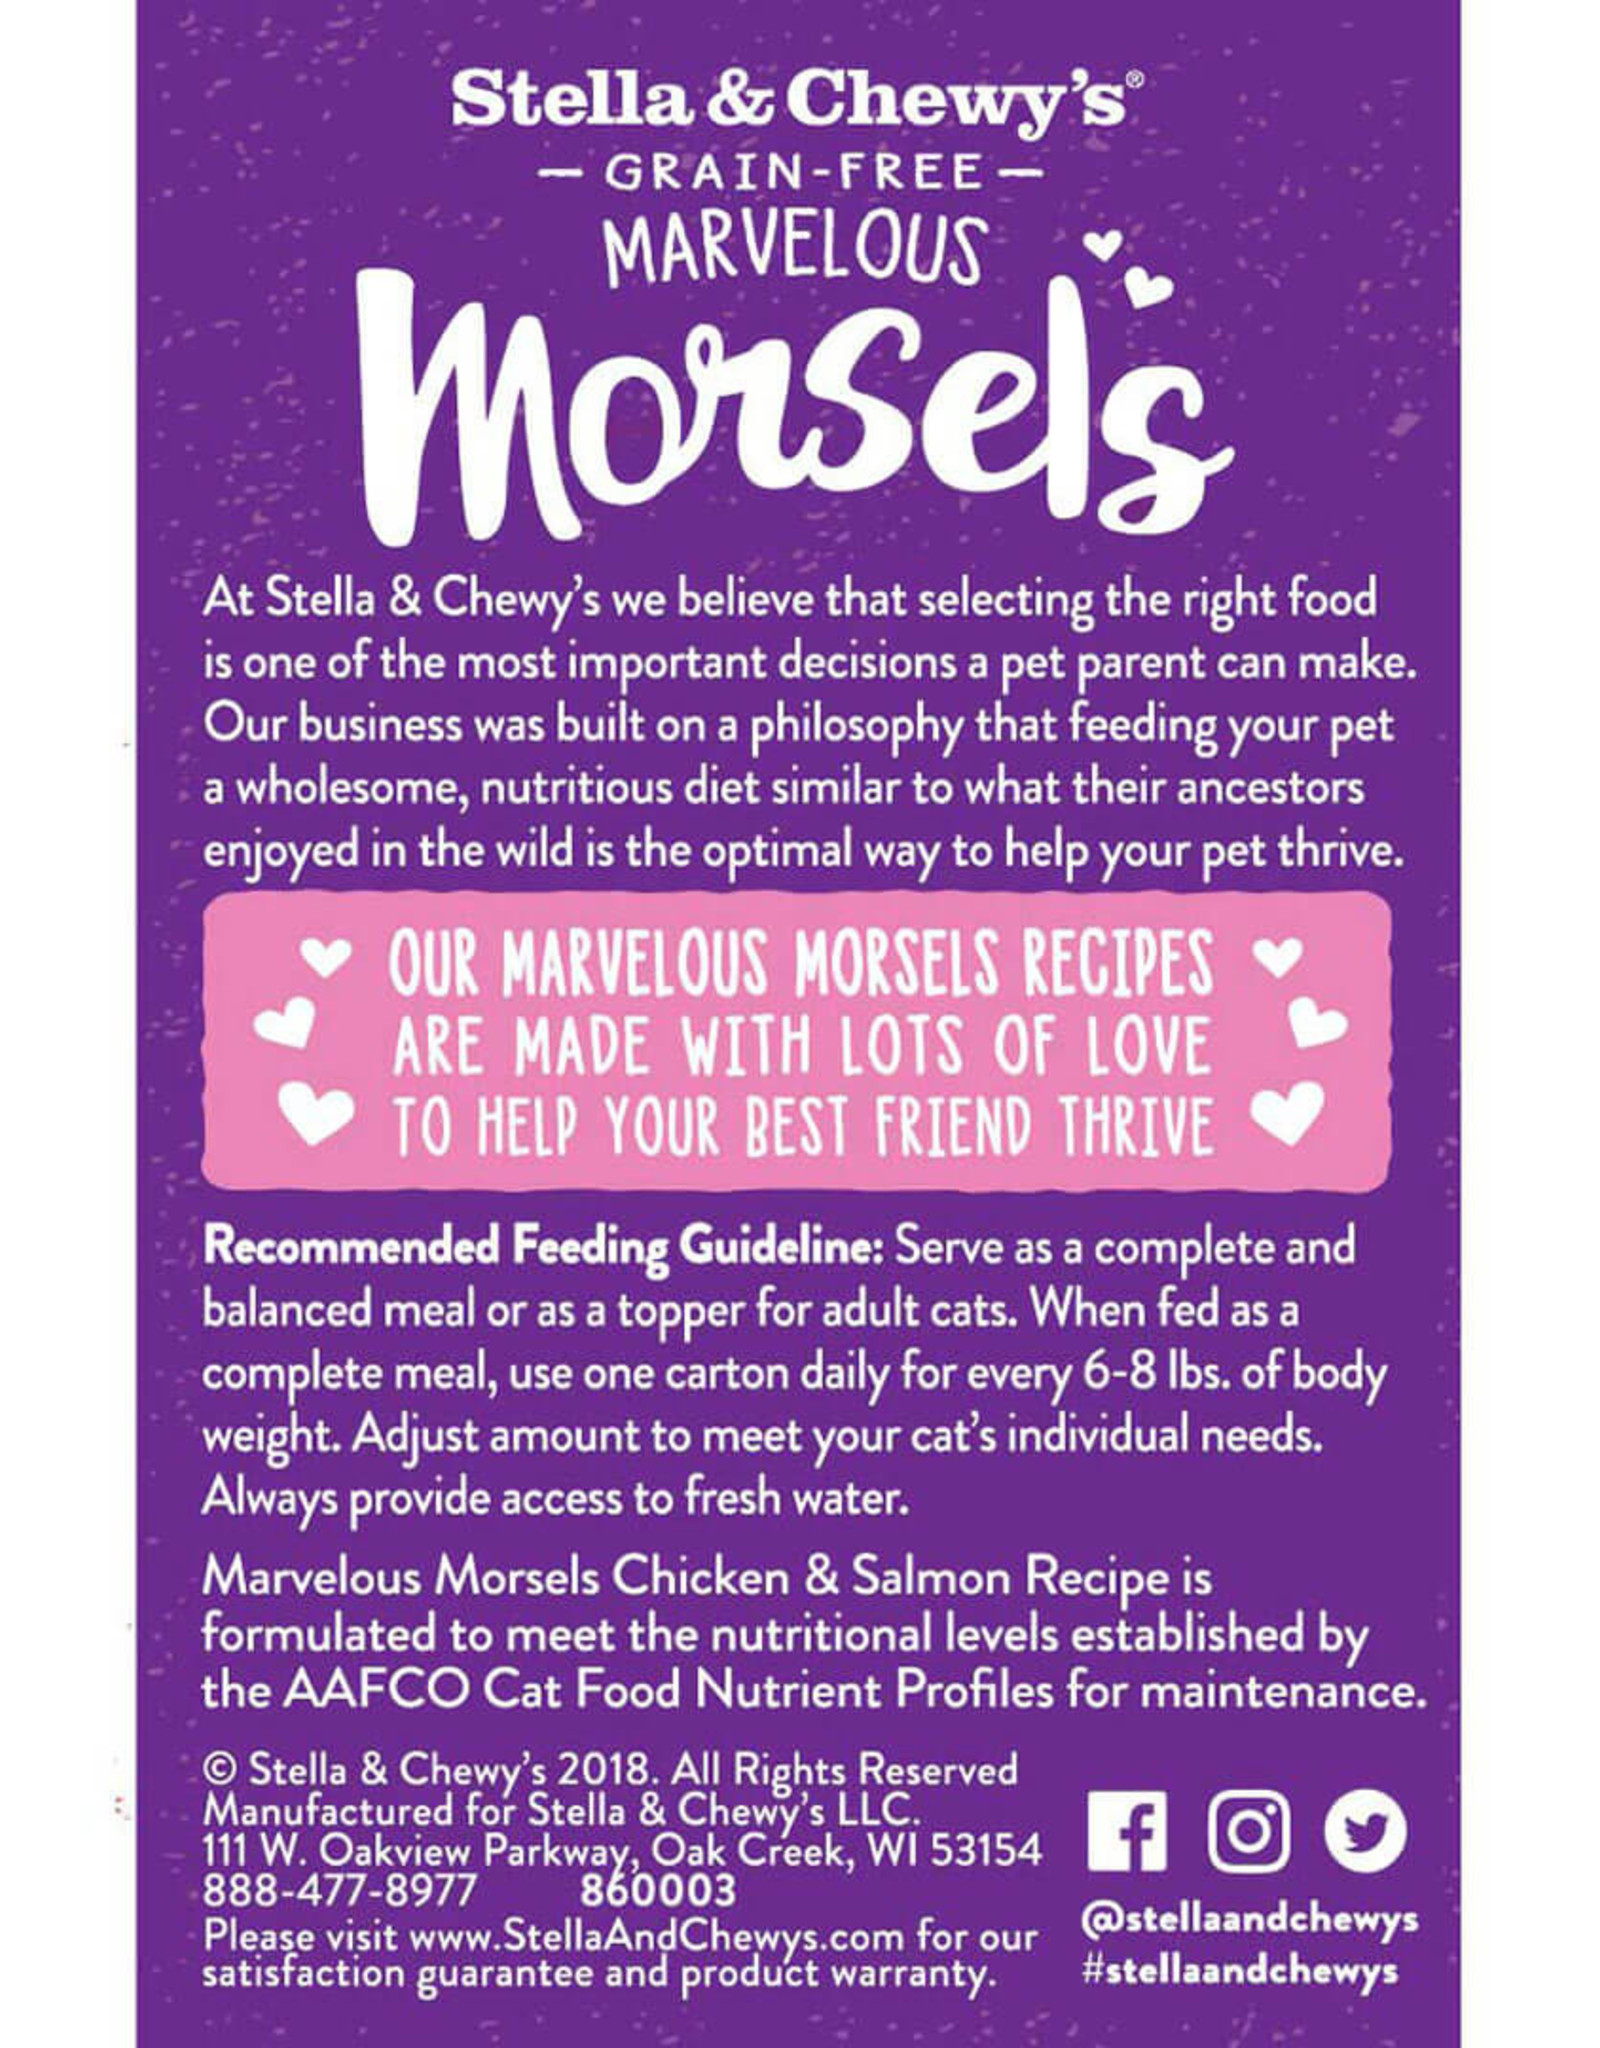 STELLA & CHEWY'S LLC STELLA & CHEWY'S CAT MARVELOUS MORSELS CHICKEN & SALMON 5.5OZ CASE OF 12